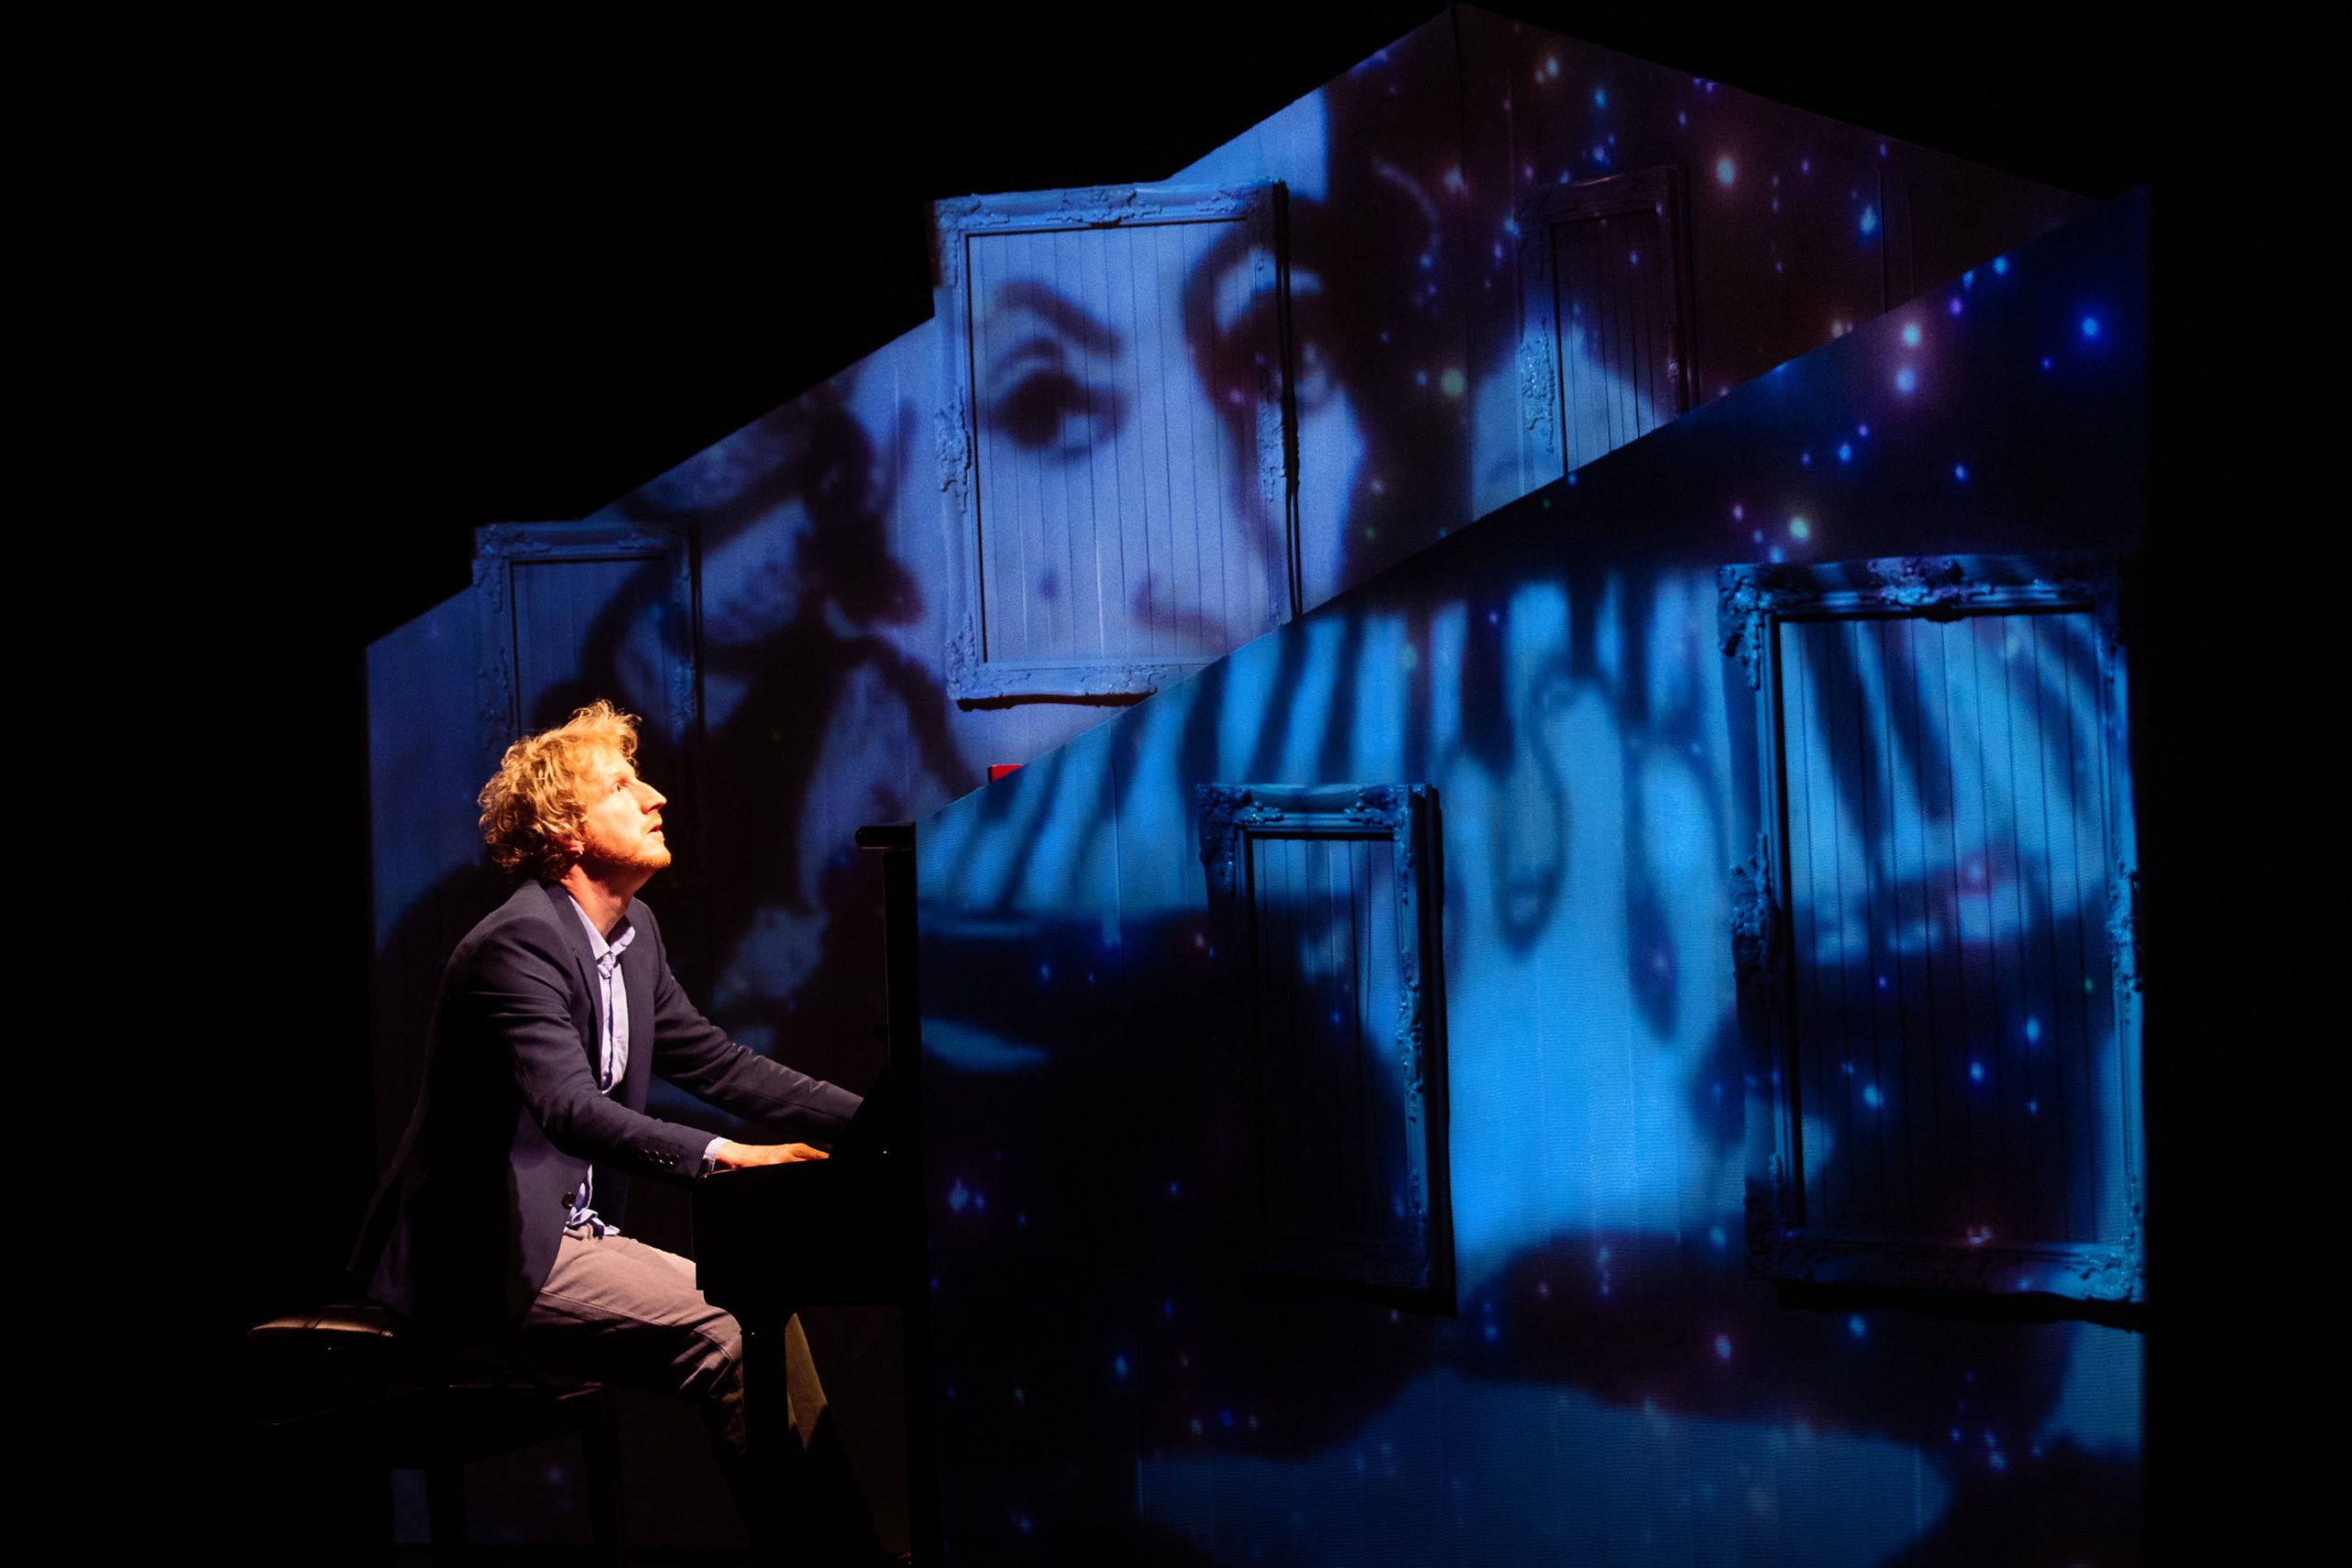 A person sits at a piano onstage, illuminated under blue and white light with projected images of faces and stars on the background wall.